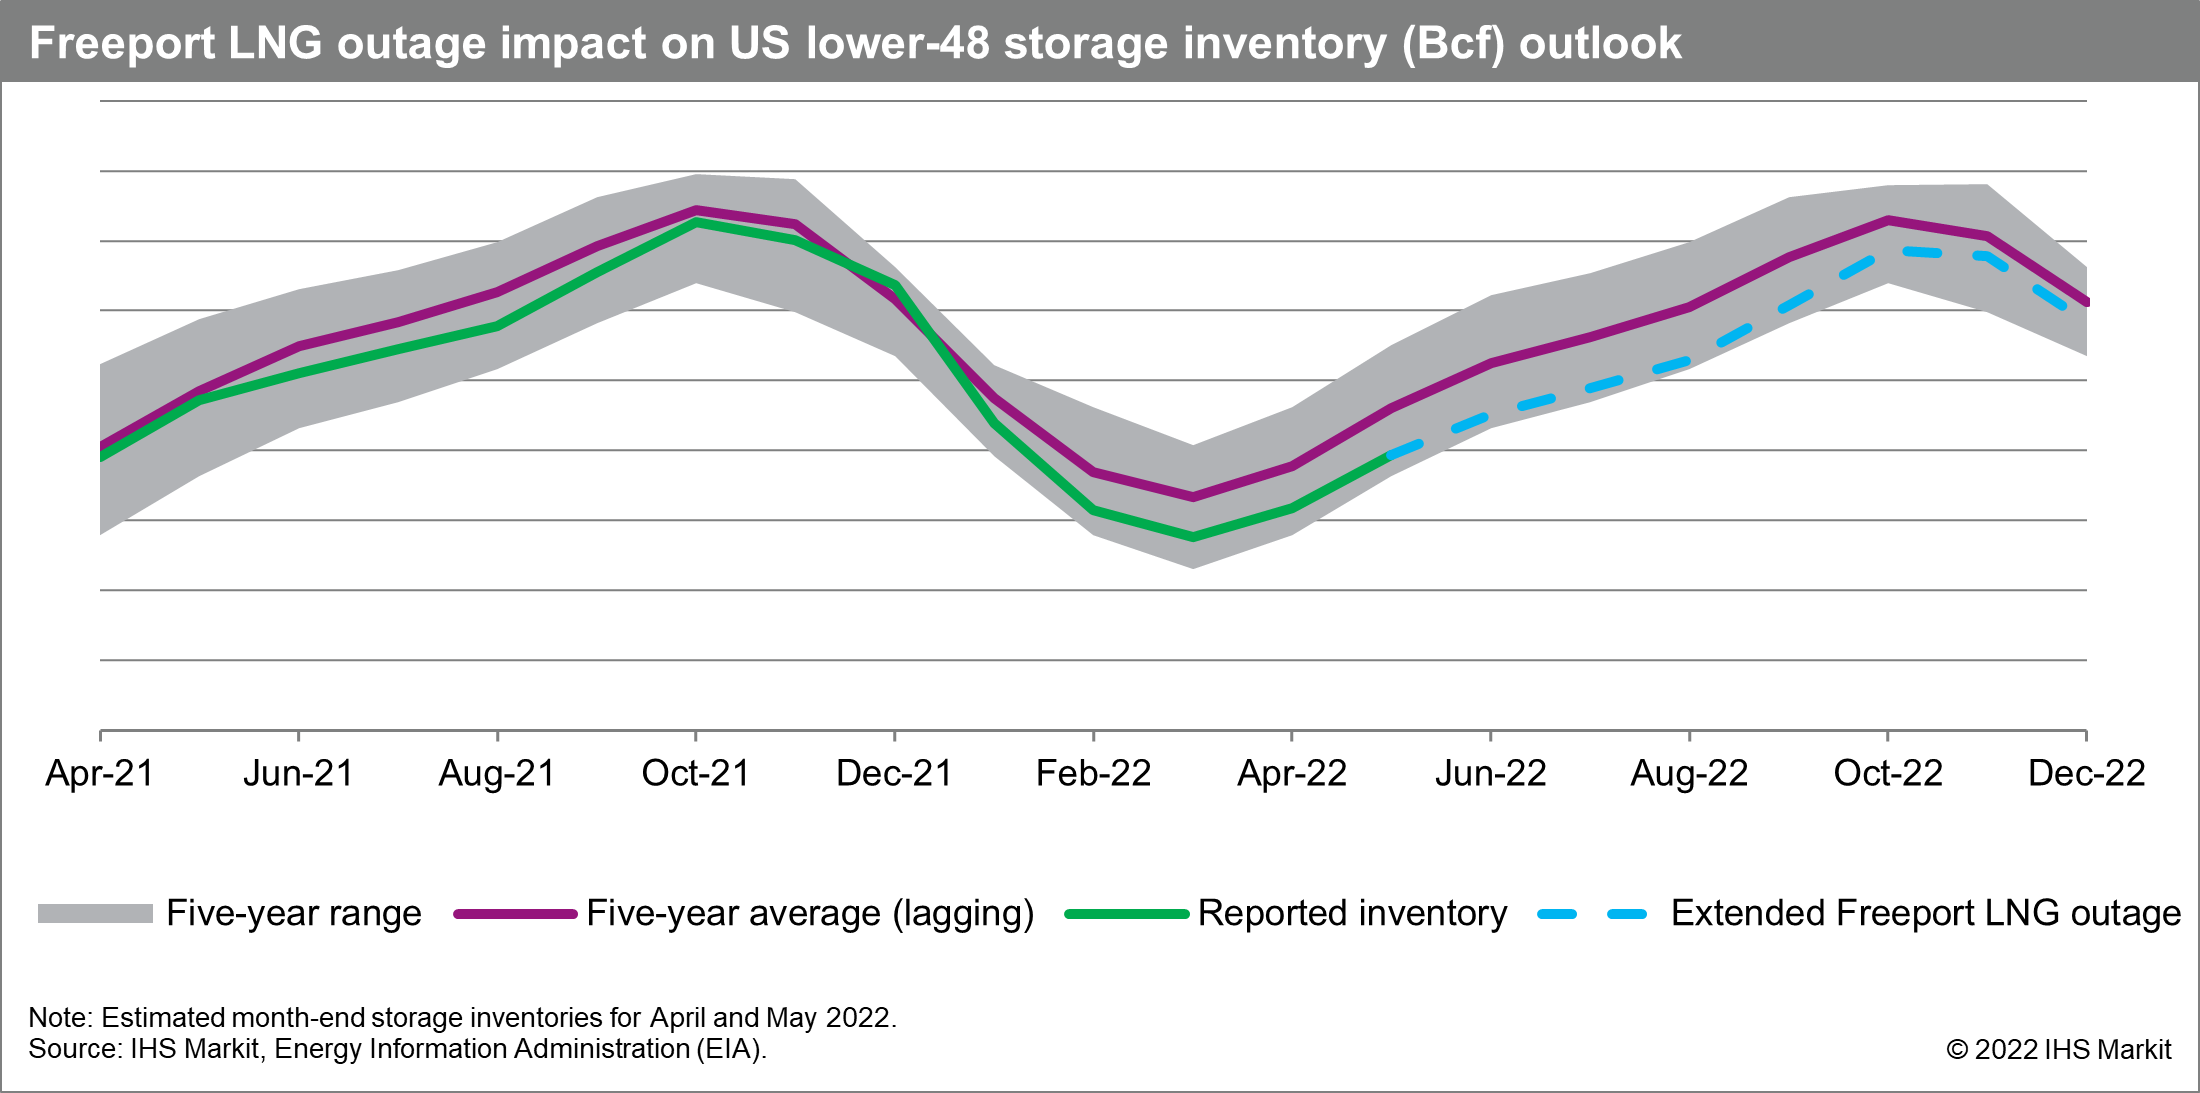 Freeport LNG outage impact on US lower-48 storage inventory (Bcf) outlook